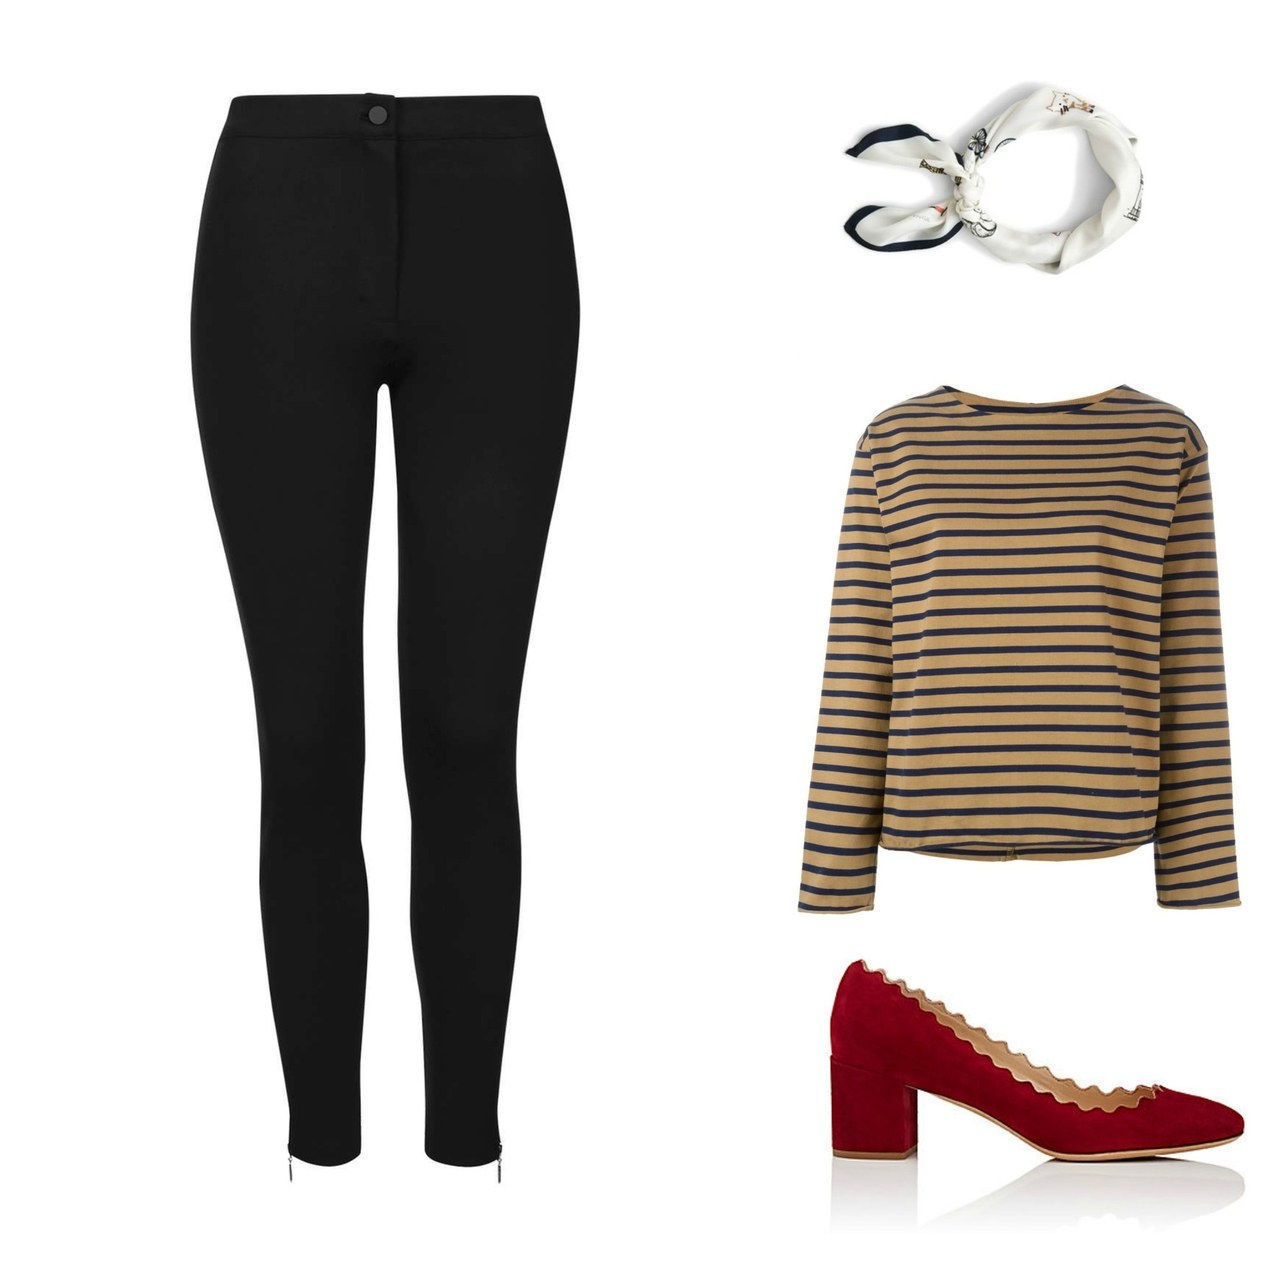 Topshop的 treggings, [$52](http://rstyle.me/n/bza5aa823e); J.Crew neck scarf, [$50](http://rstyle.me/n/bza5bw823e); MiH Jeans sweater, [$140](http://rstyle.me/n/bza5de823e); Chloé pumps, [$570](http://rstyle.me/n/bzcfsa823e) 